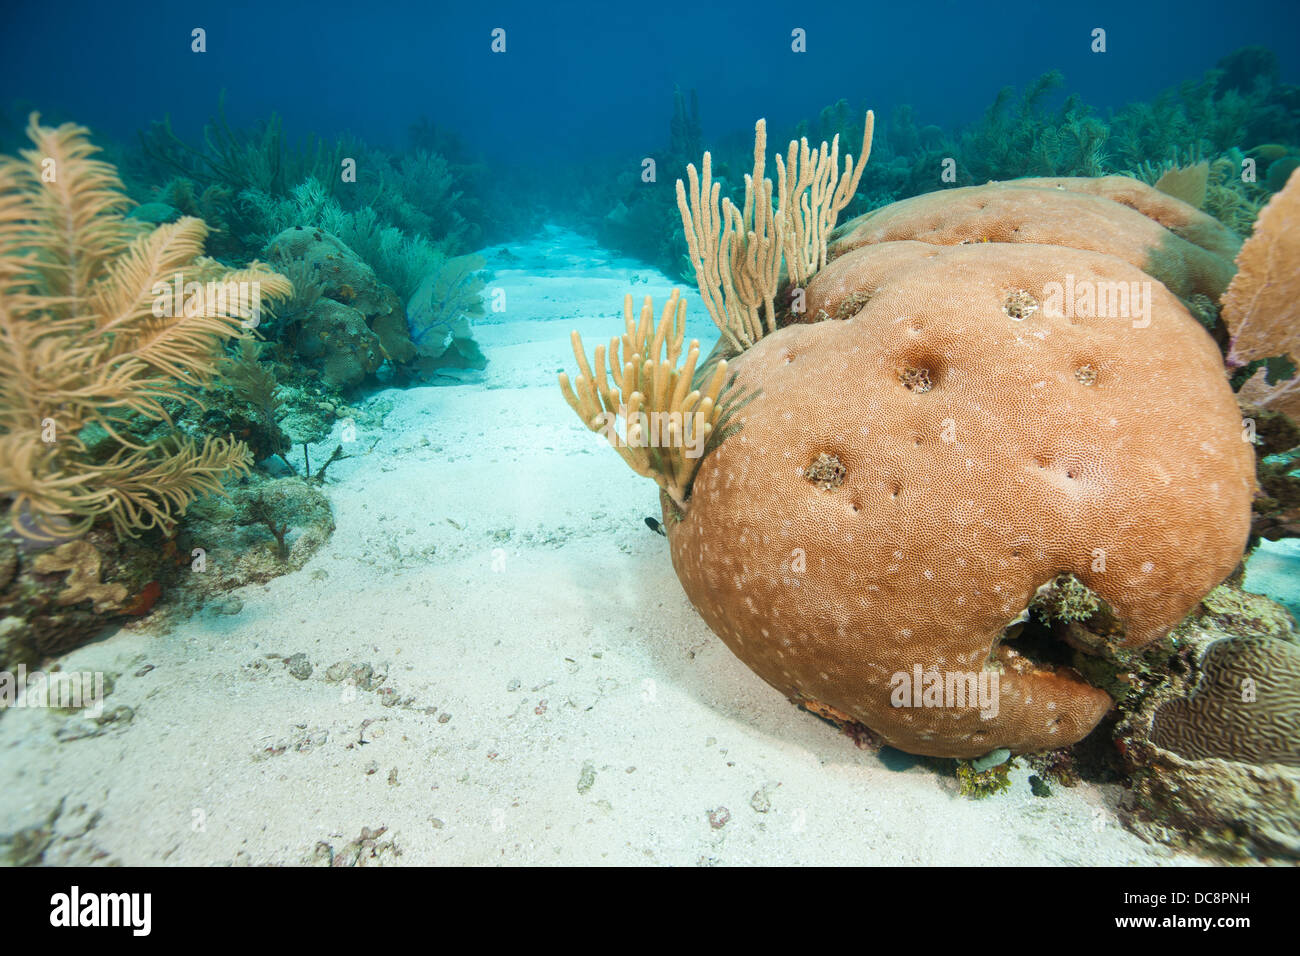 Massive Starlet Coral (Siderastrea siderea) in front of a sand corridor on a tropical coral reef Stock Photo